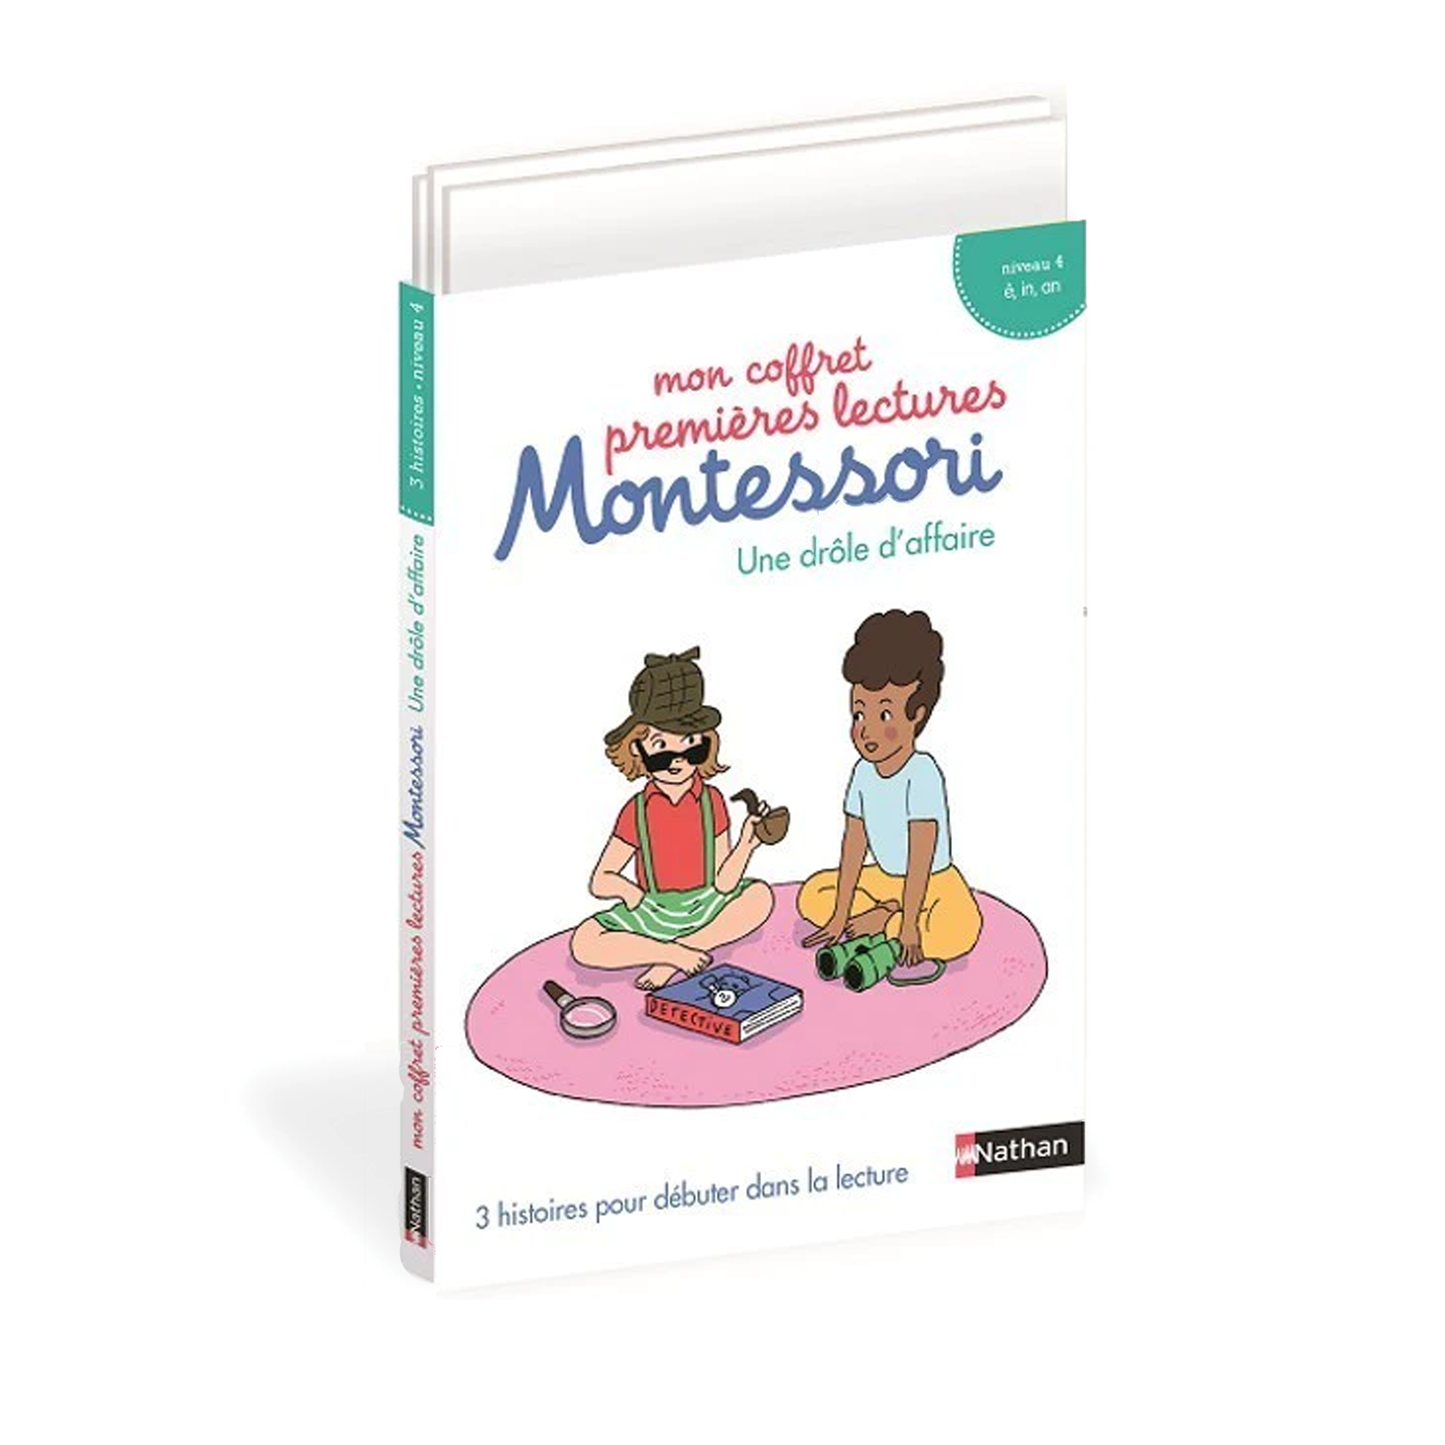 My first Montessori reading box - a funny deal - Level 4 - Nathan